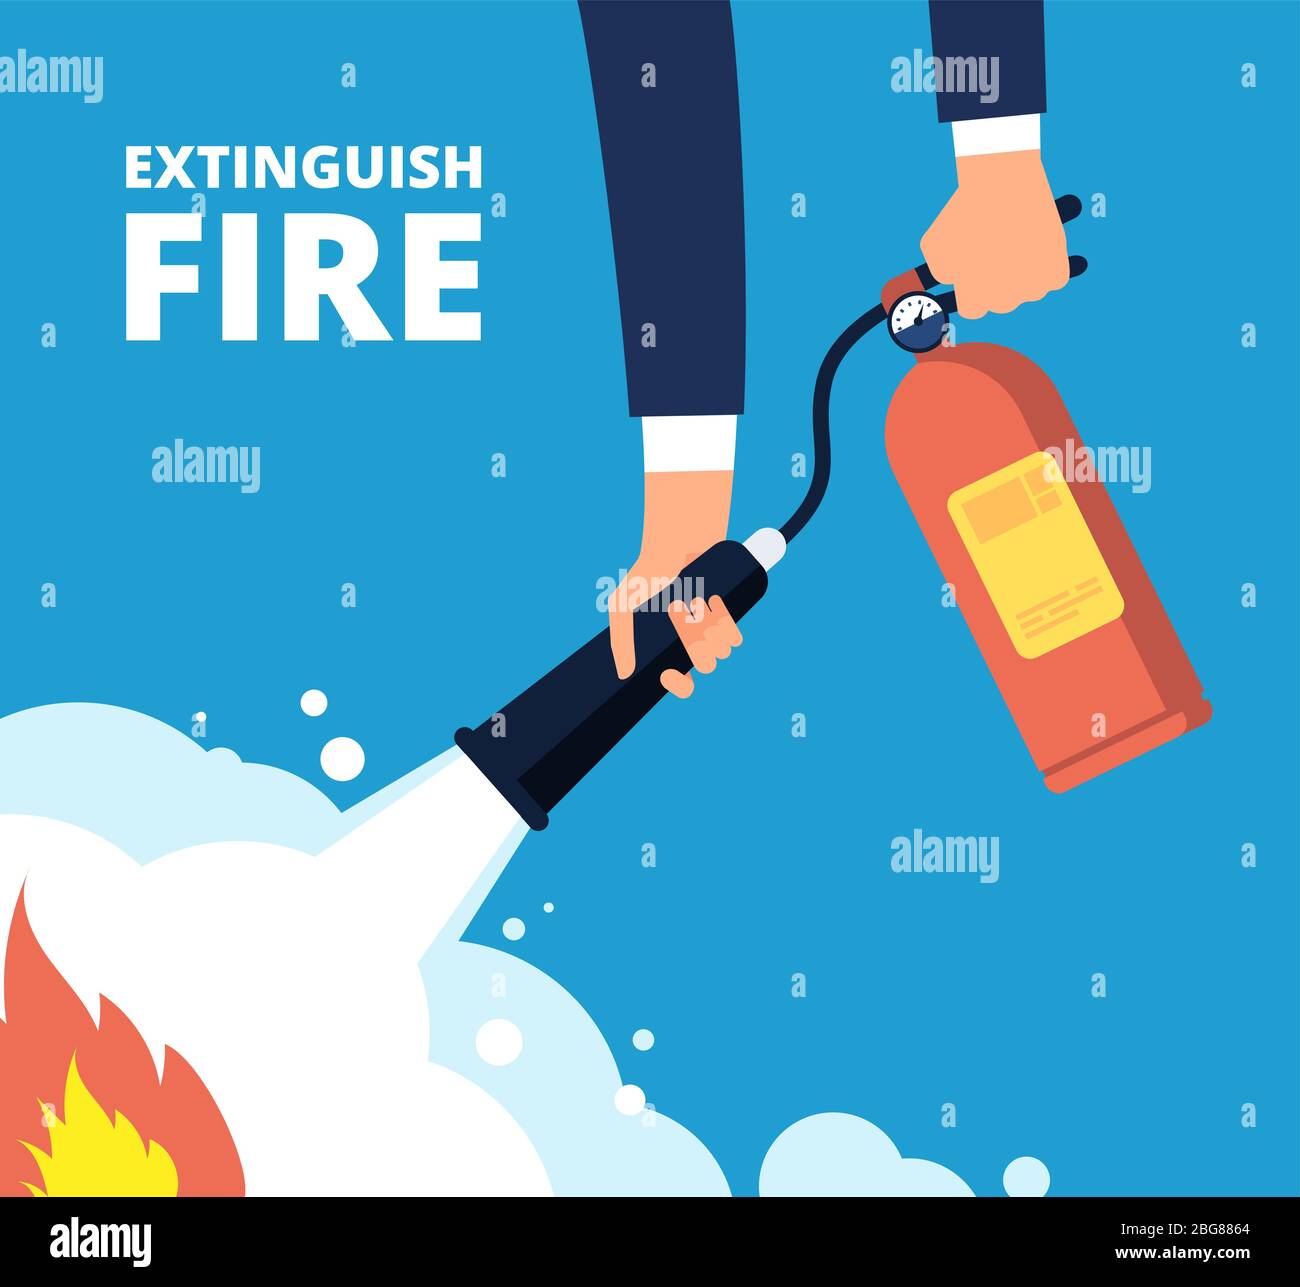 Extinguish fire. Fireman with fire extinguisher. Emergency training and protection from flame vector concept. Illustration of protection and danger burn, security accident Stock Vector